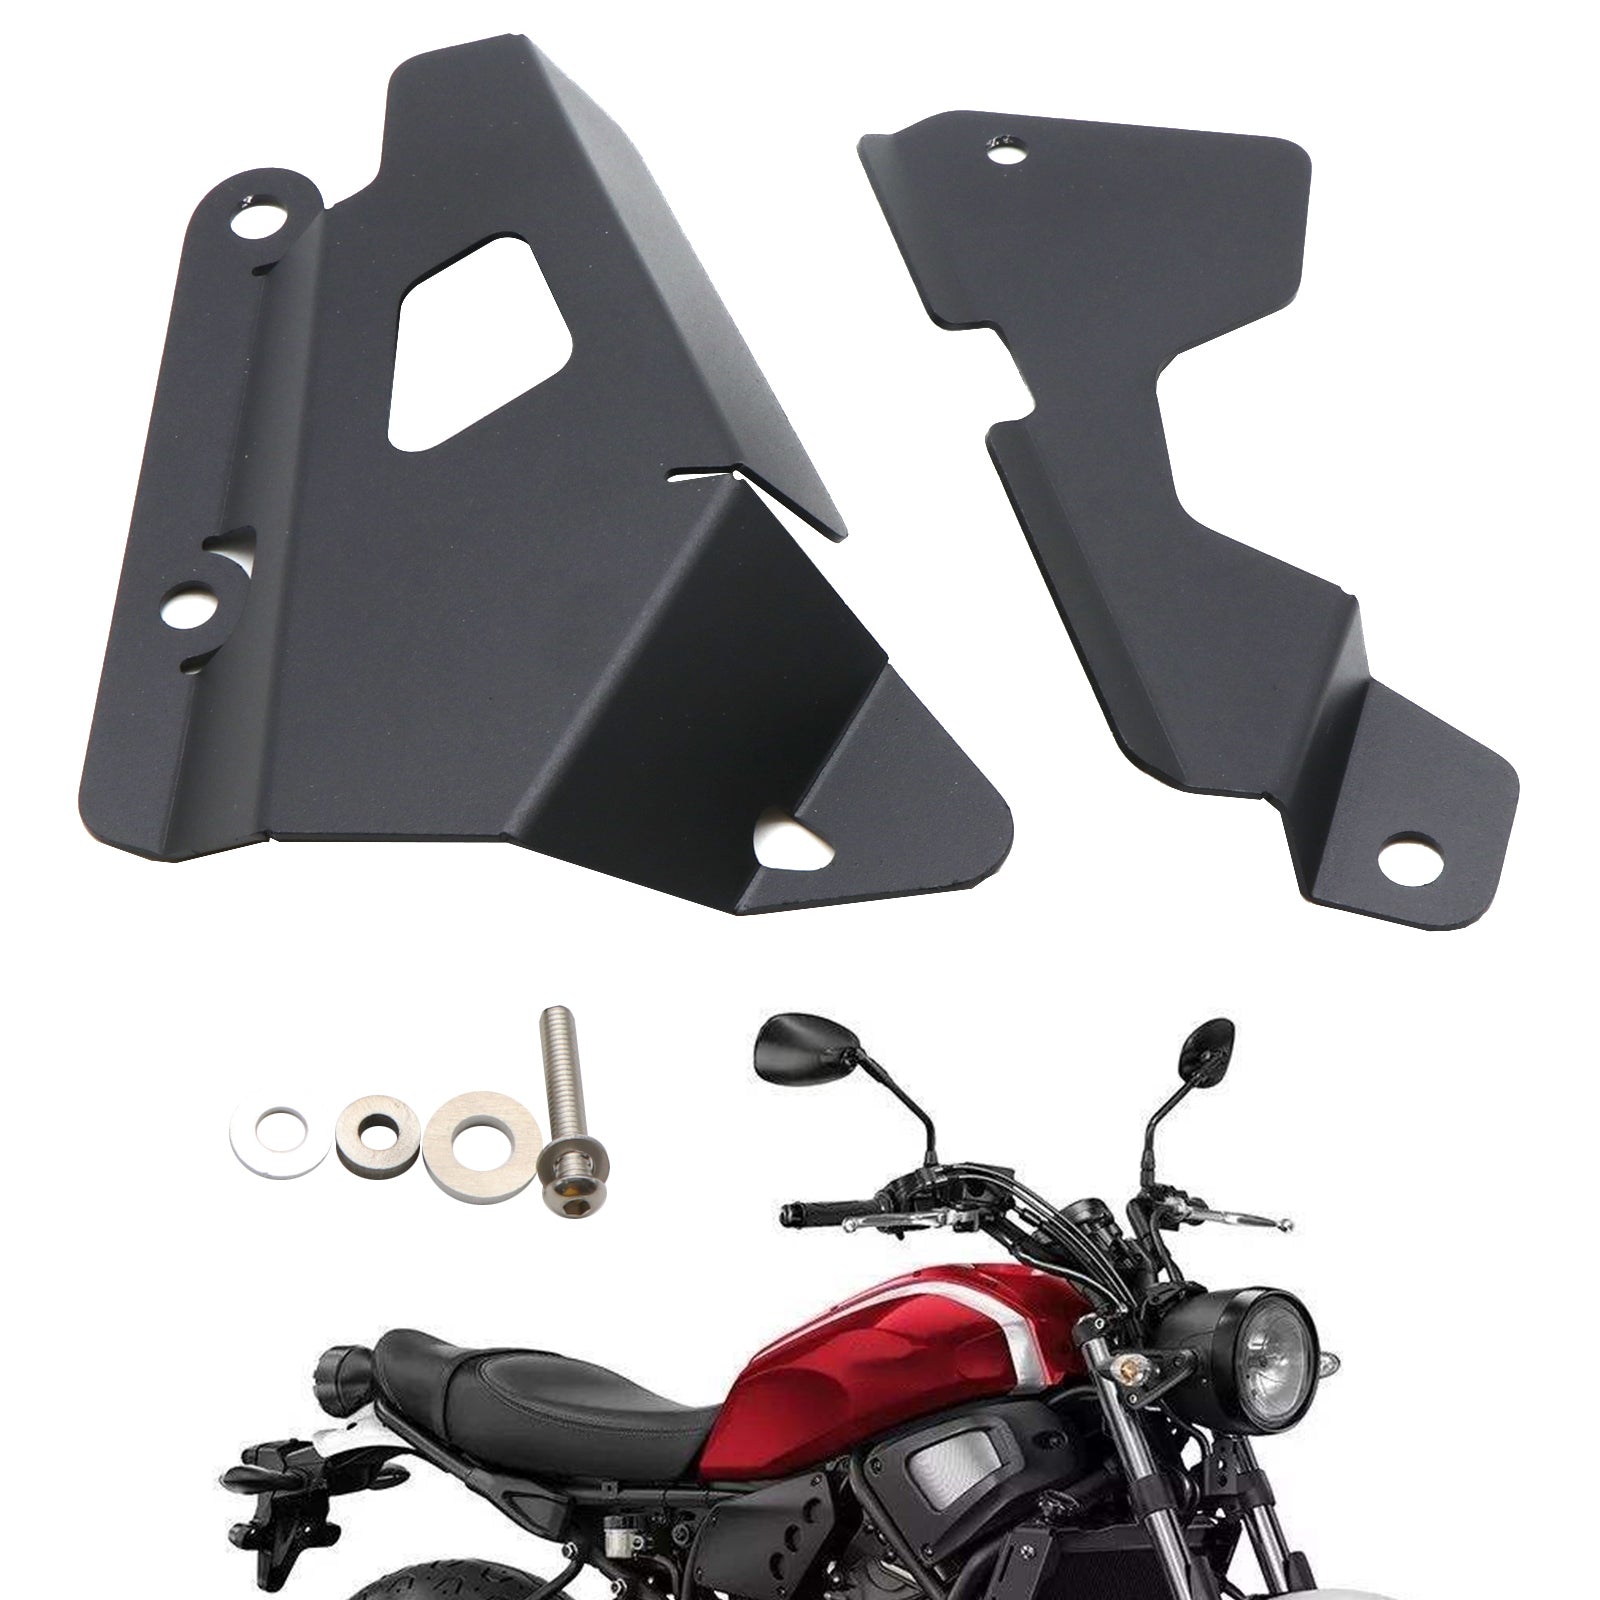 Motorcycle Rear Brake Reservoir Guard Cover fit for YAMAHA XSR 700 2015-2020